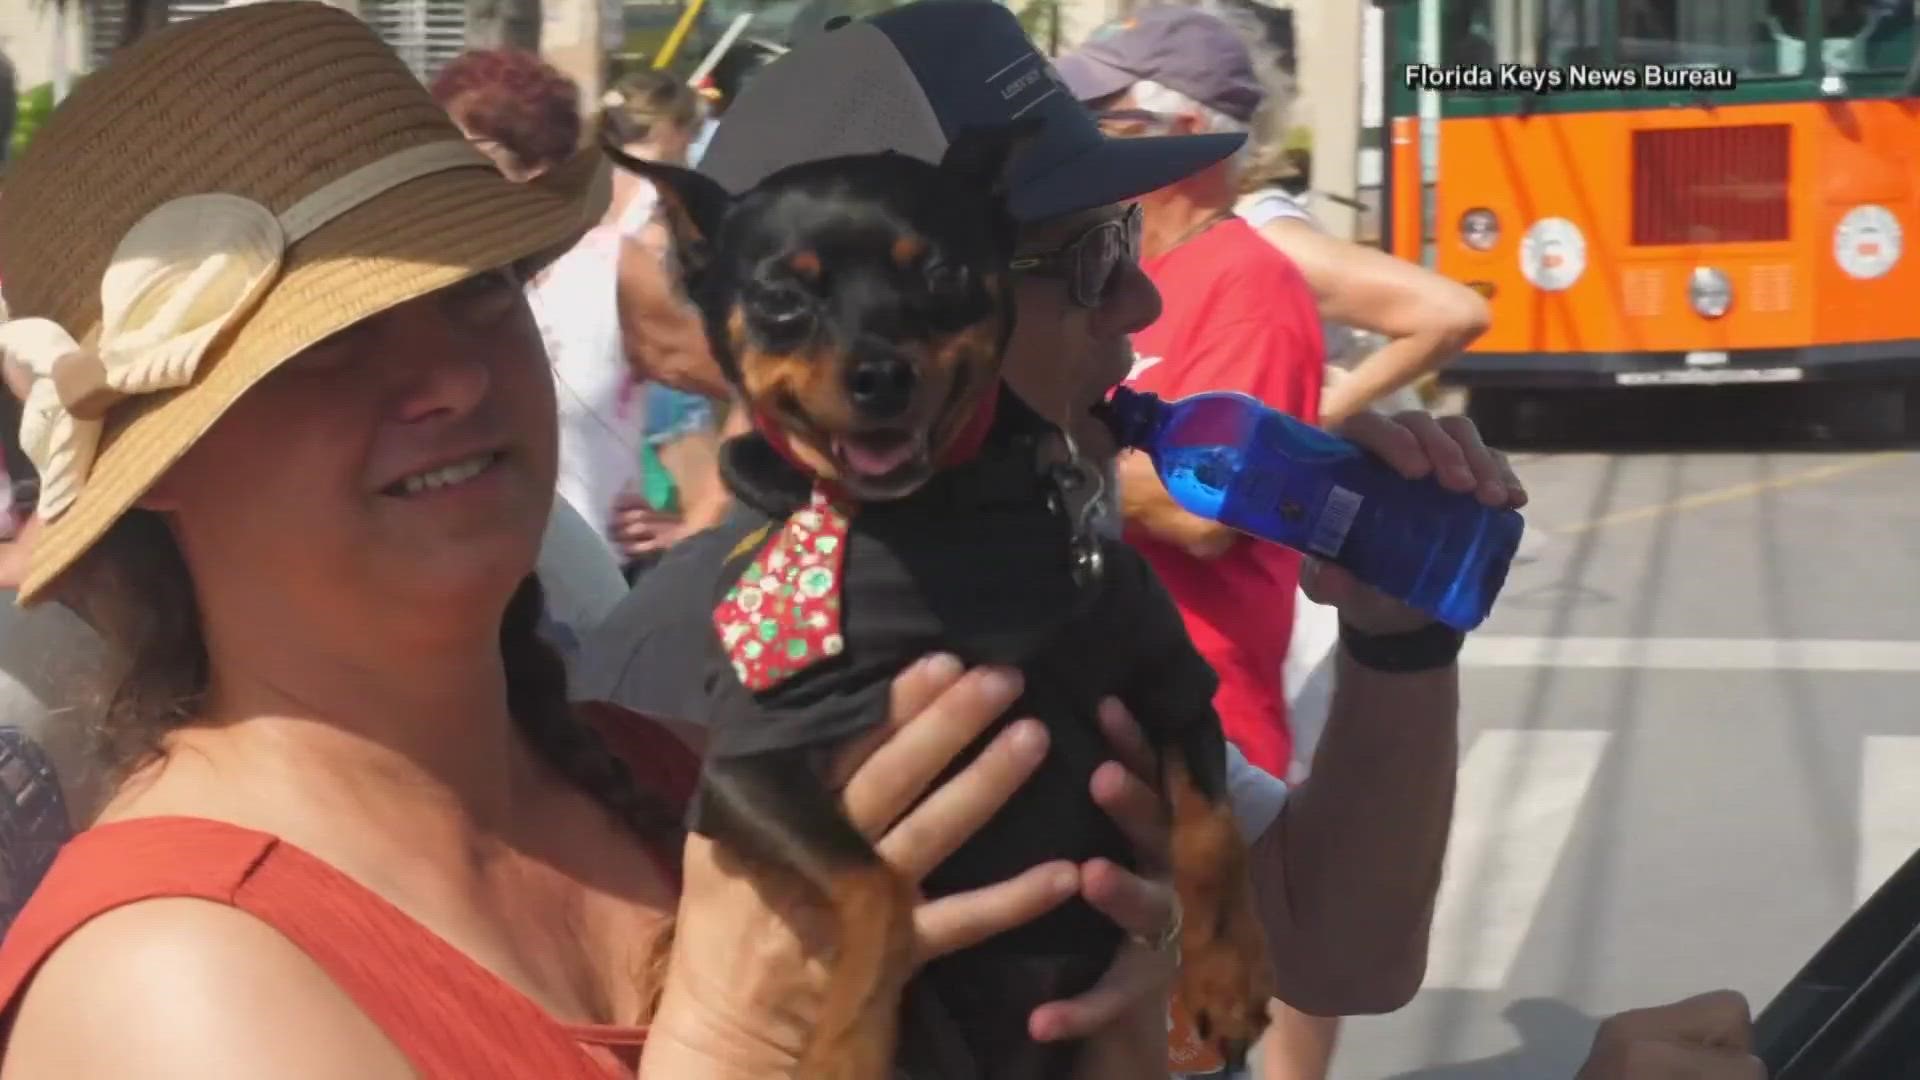 The parade saw hundreds of pets and owners participate to help raise money for a local non-profit.